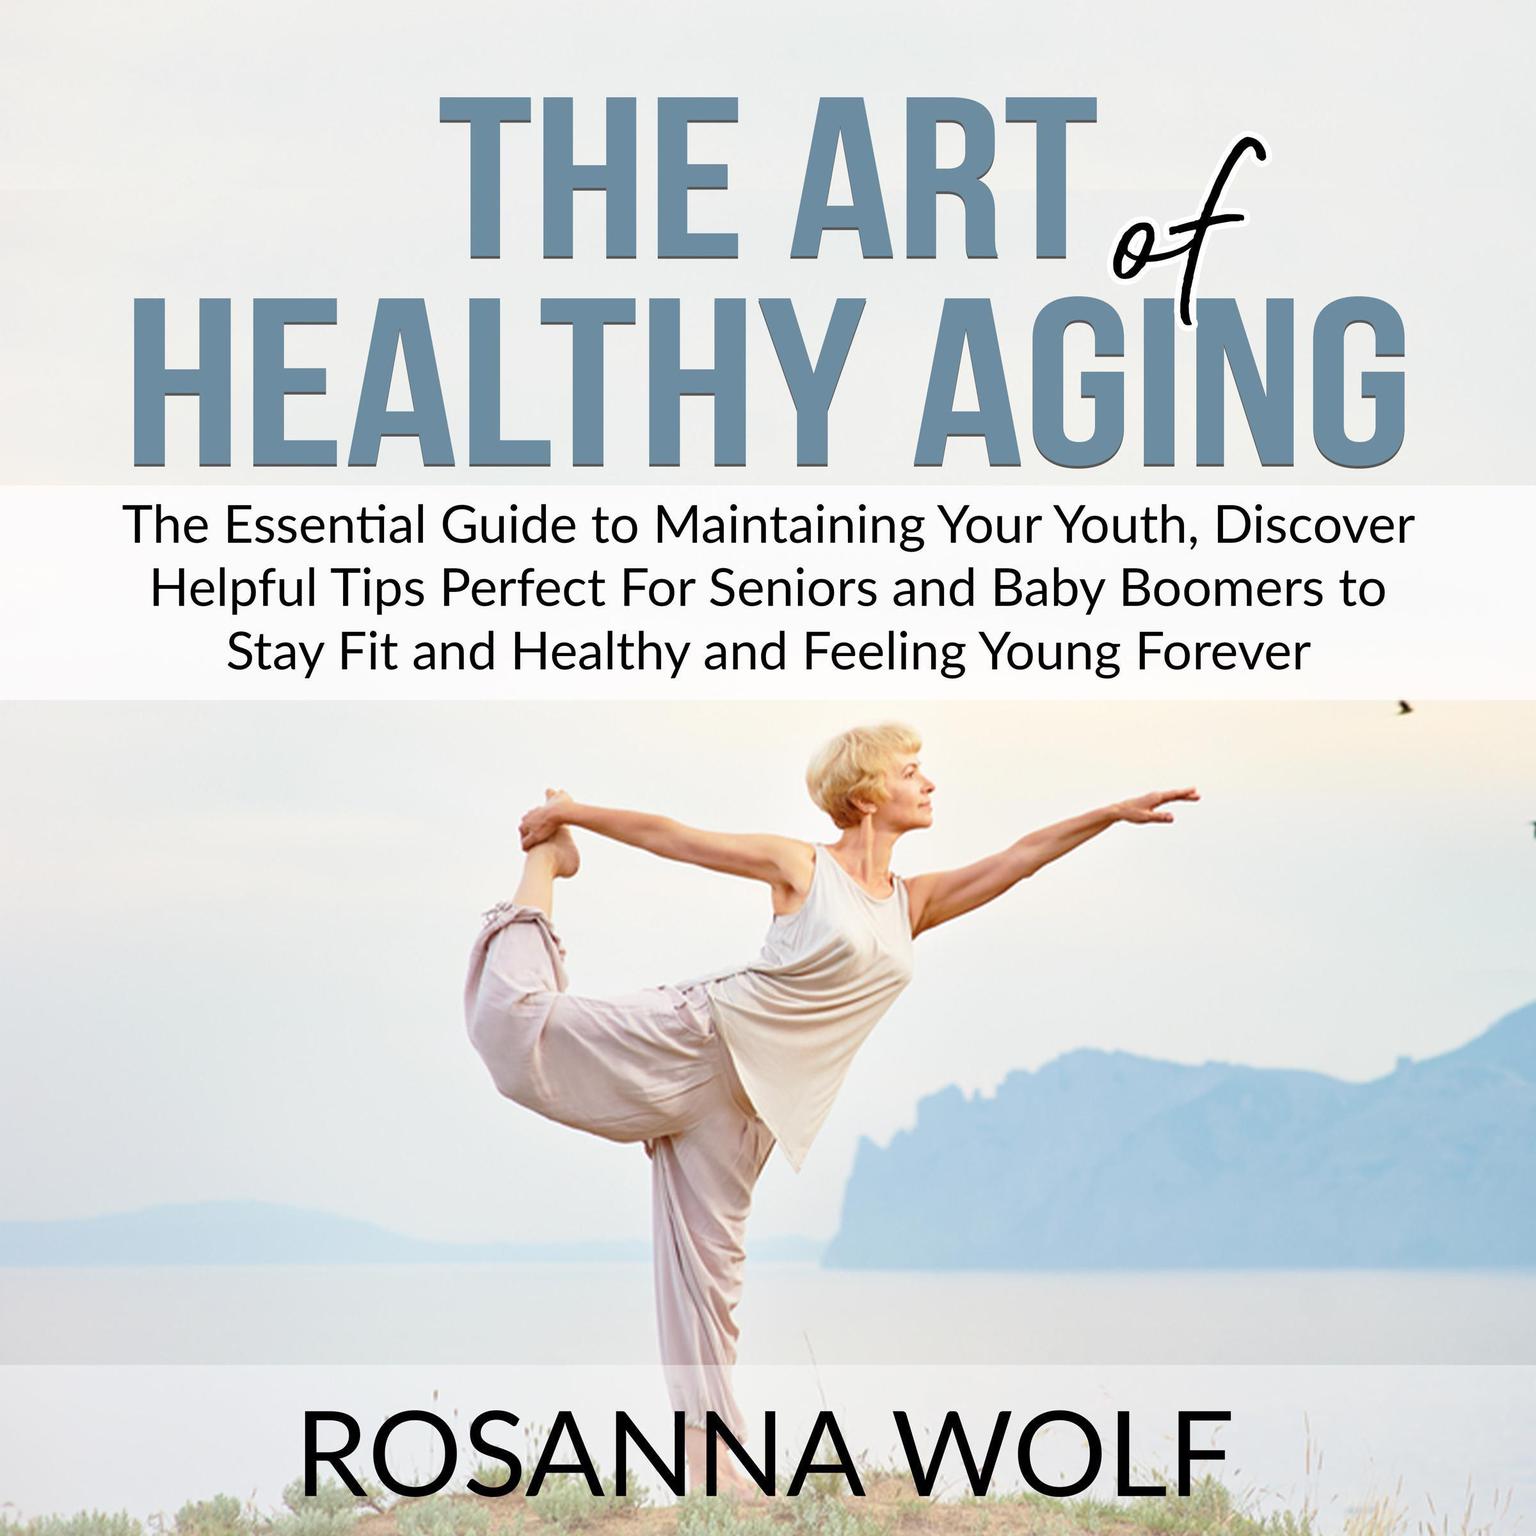 The Art of Healthy Aging: The Essential Guide to Maintaining Your Youth, Discover Helpful Tips Perfect For Seniors and Baby Boomers to Stay Fit and Healthy and Feeling Young Forever Audiobook, by Rosanna Wolf